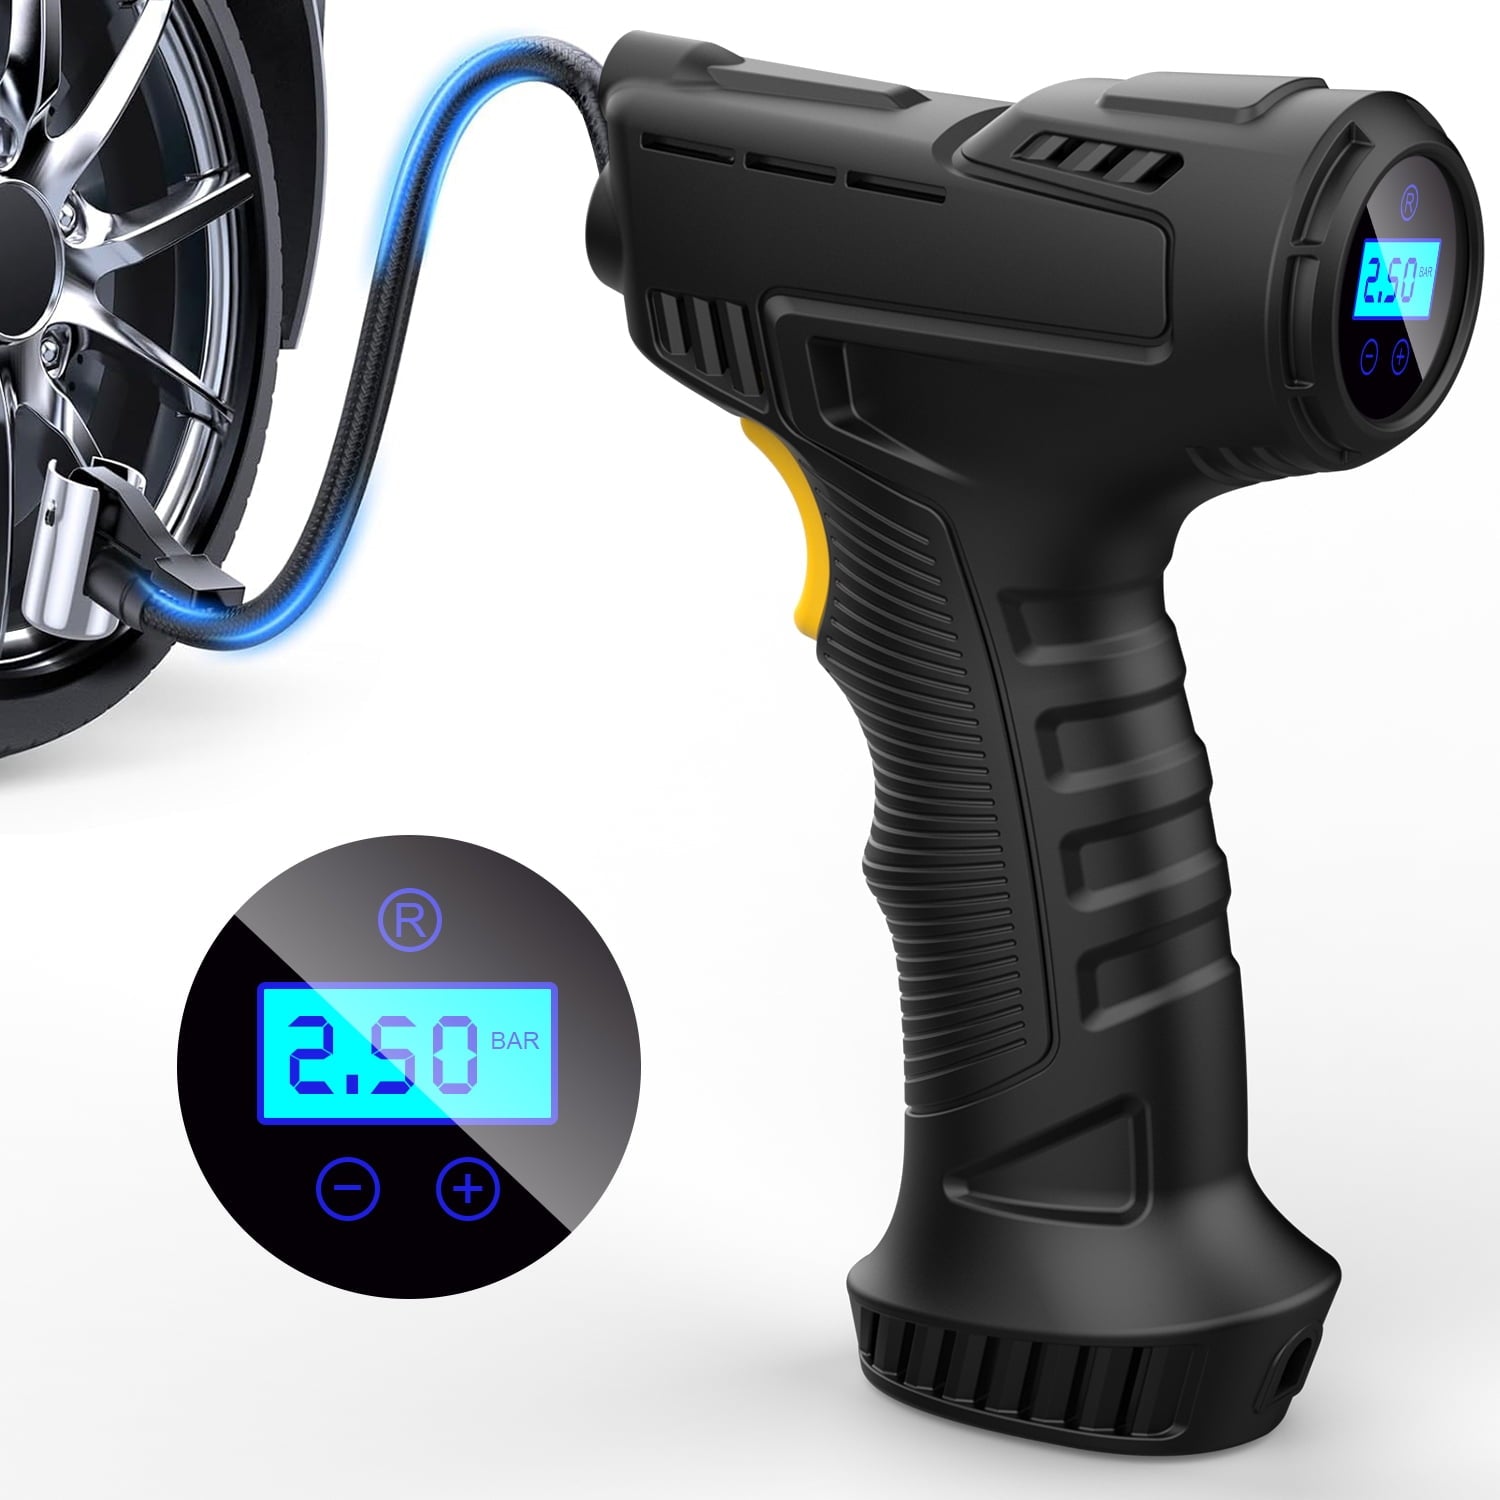 Portable air Compressor for Car Tires, 12V DC tire inflator Pump with Digital Pressure Gauge, 150 PSI with Emergency LED Flashlight for Car, Bicycles, Balloons and Other Inflatables